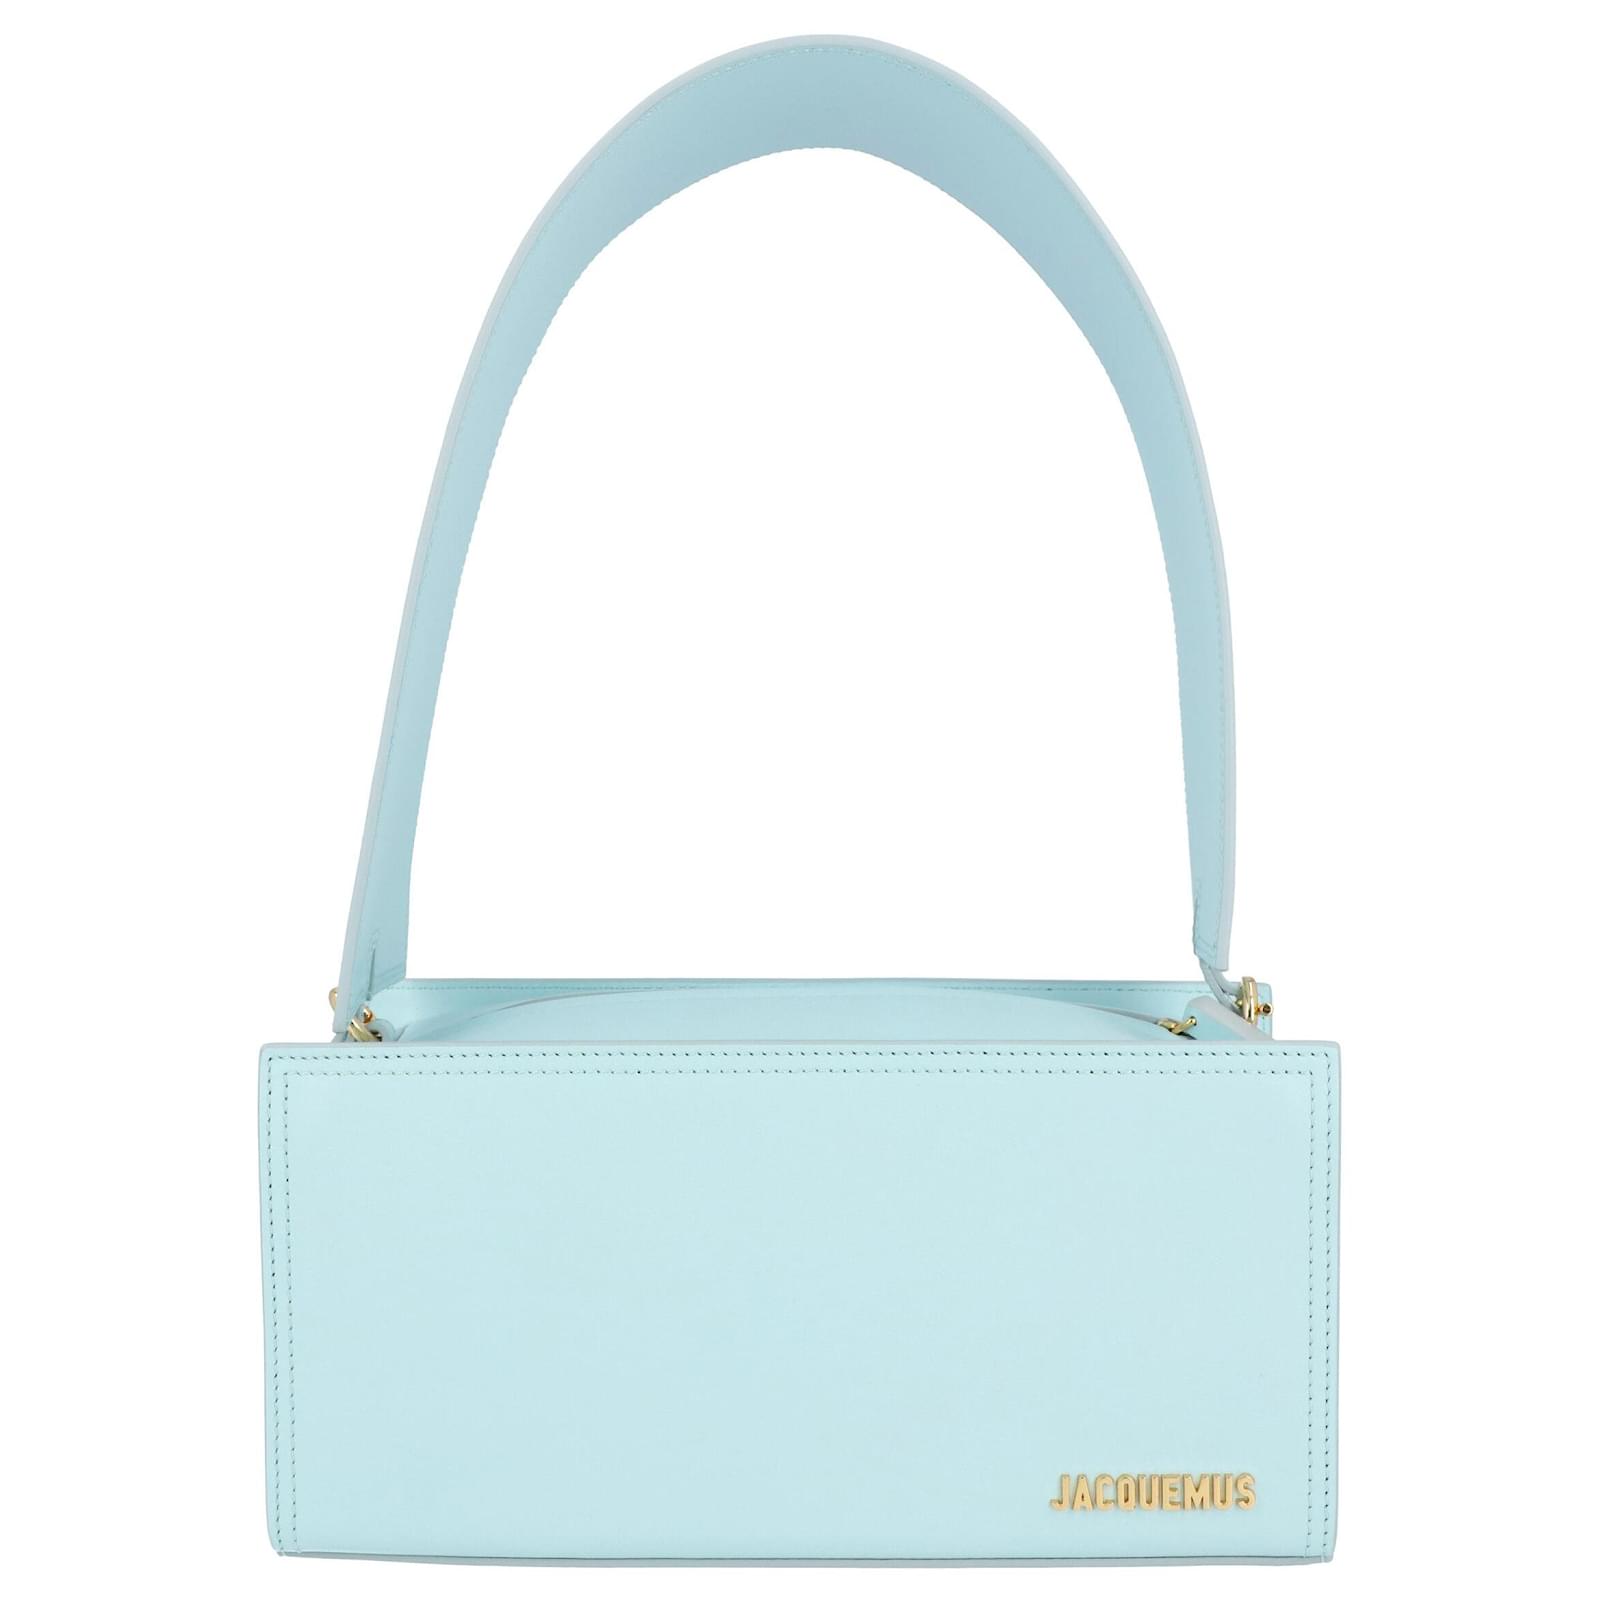 Jacquemus Le Chiquito long bag for Women - Pink in KSA